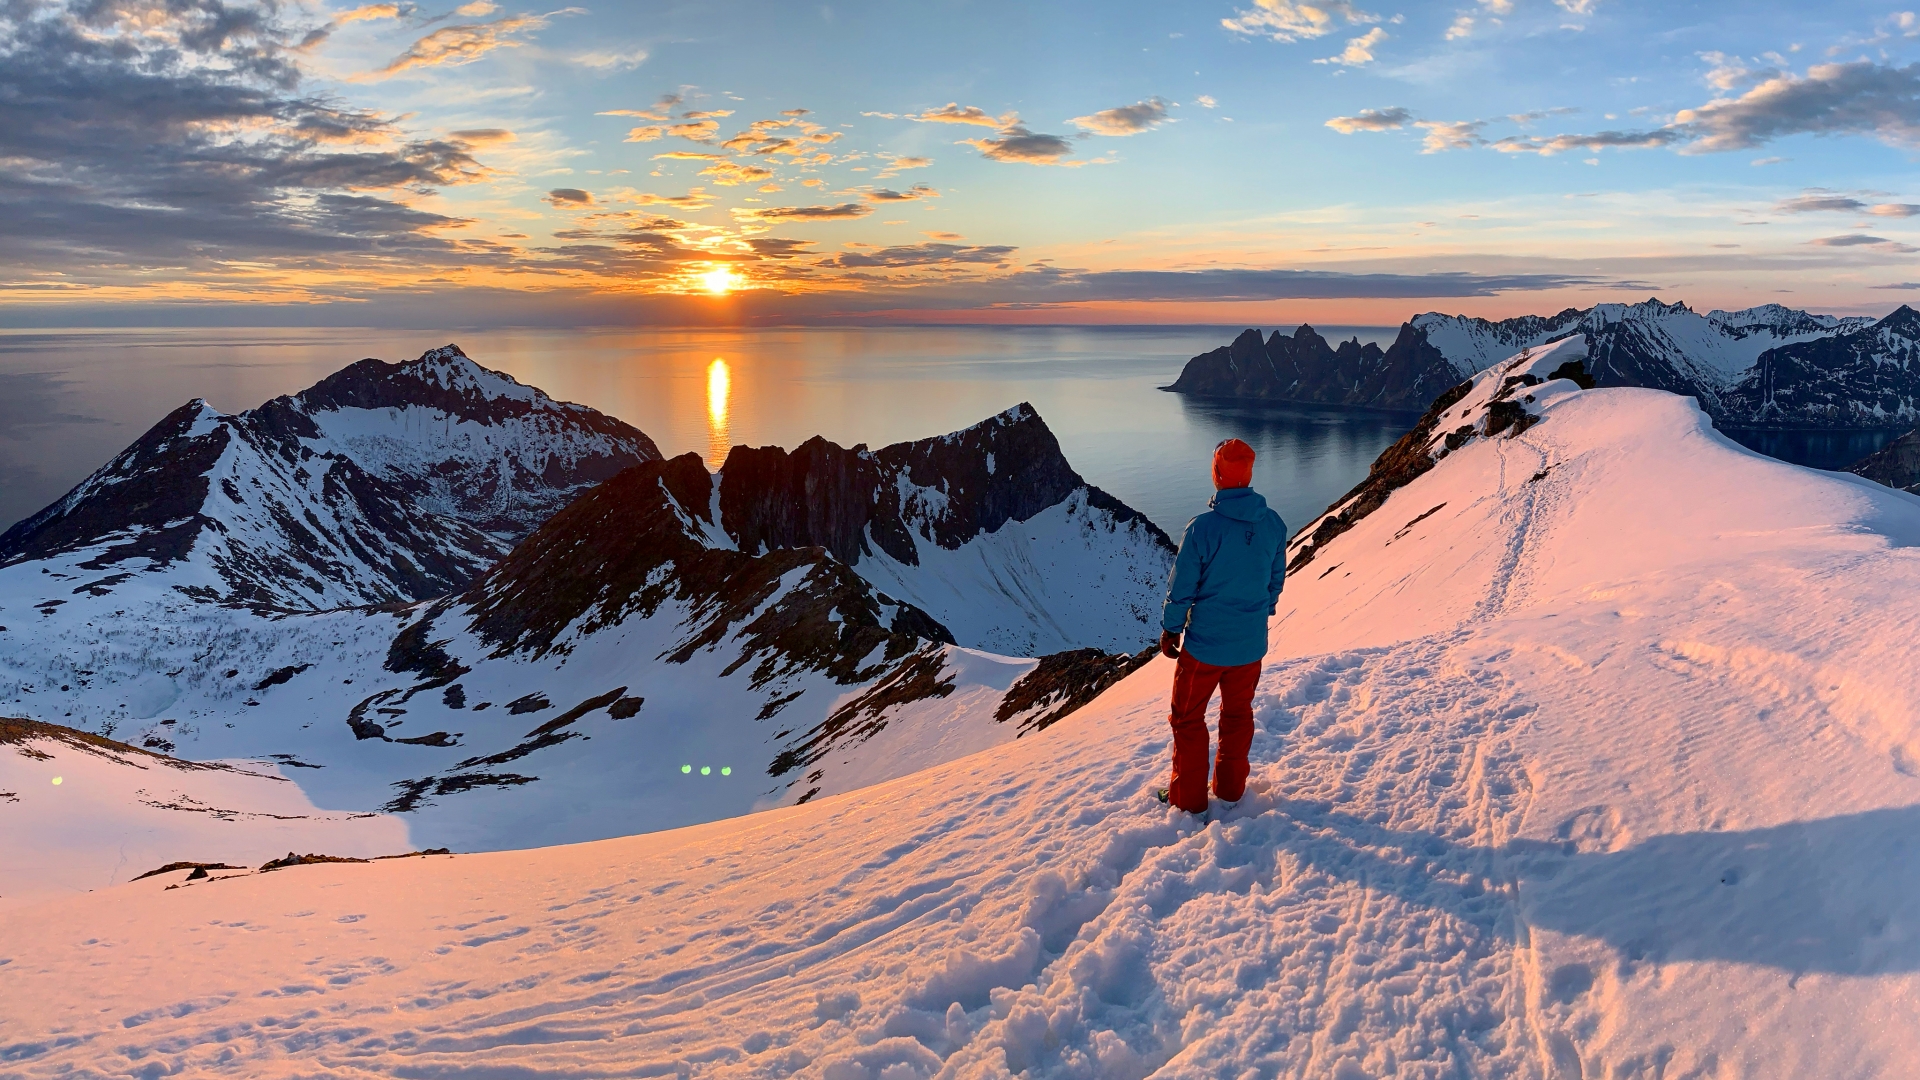 Skiing in the Senja mountains